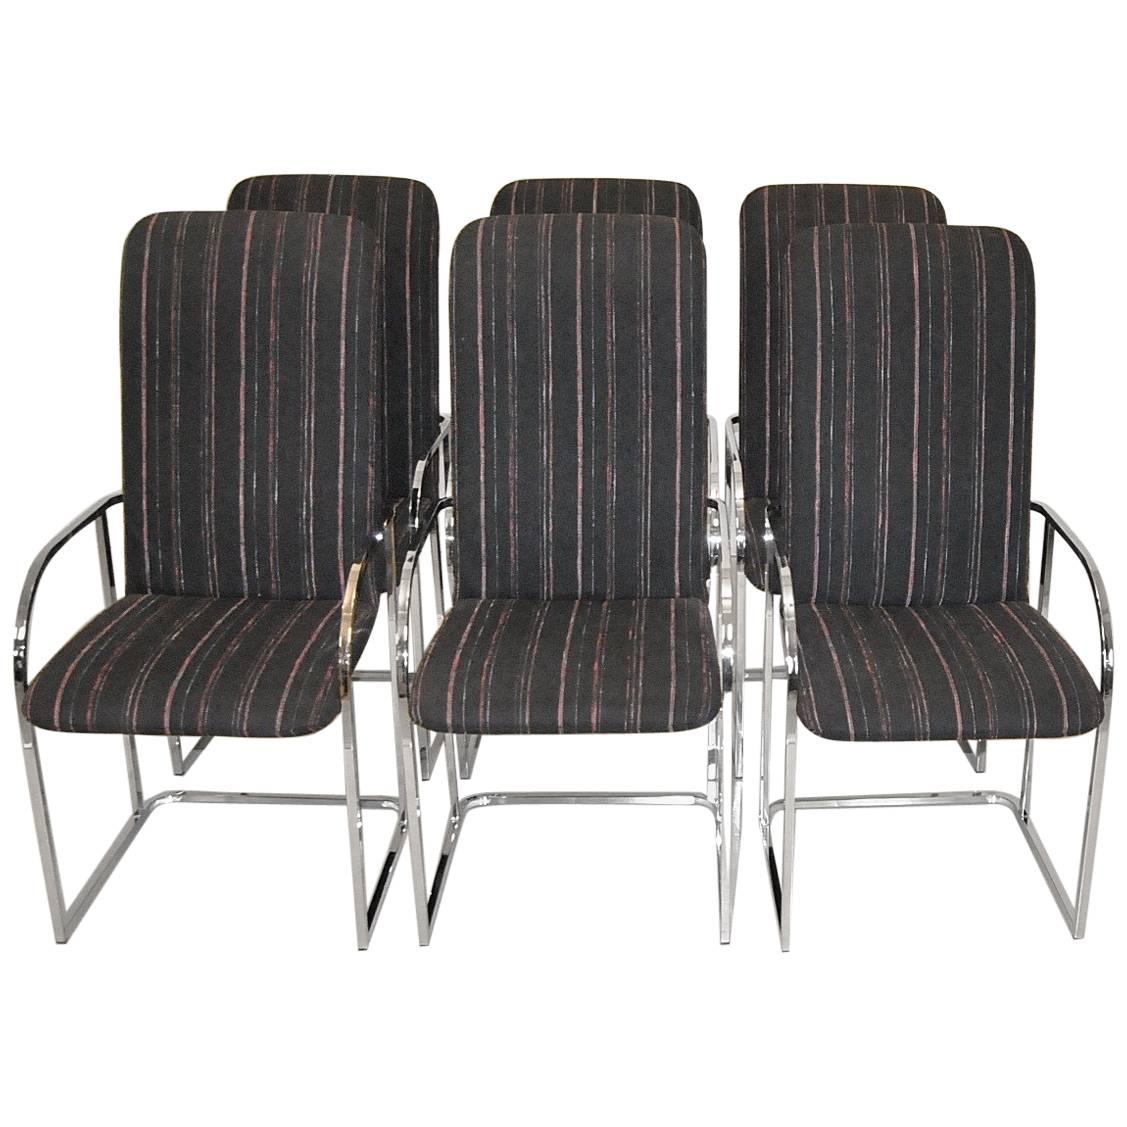 Set of Six Chrome Upholstered Dining Chairs by Design Institute of America